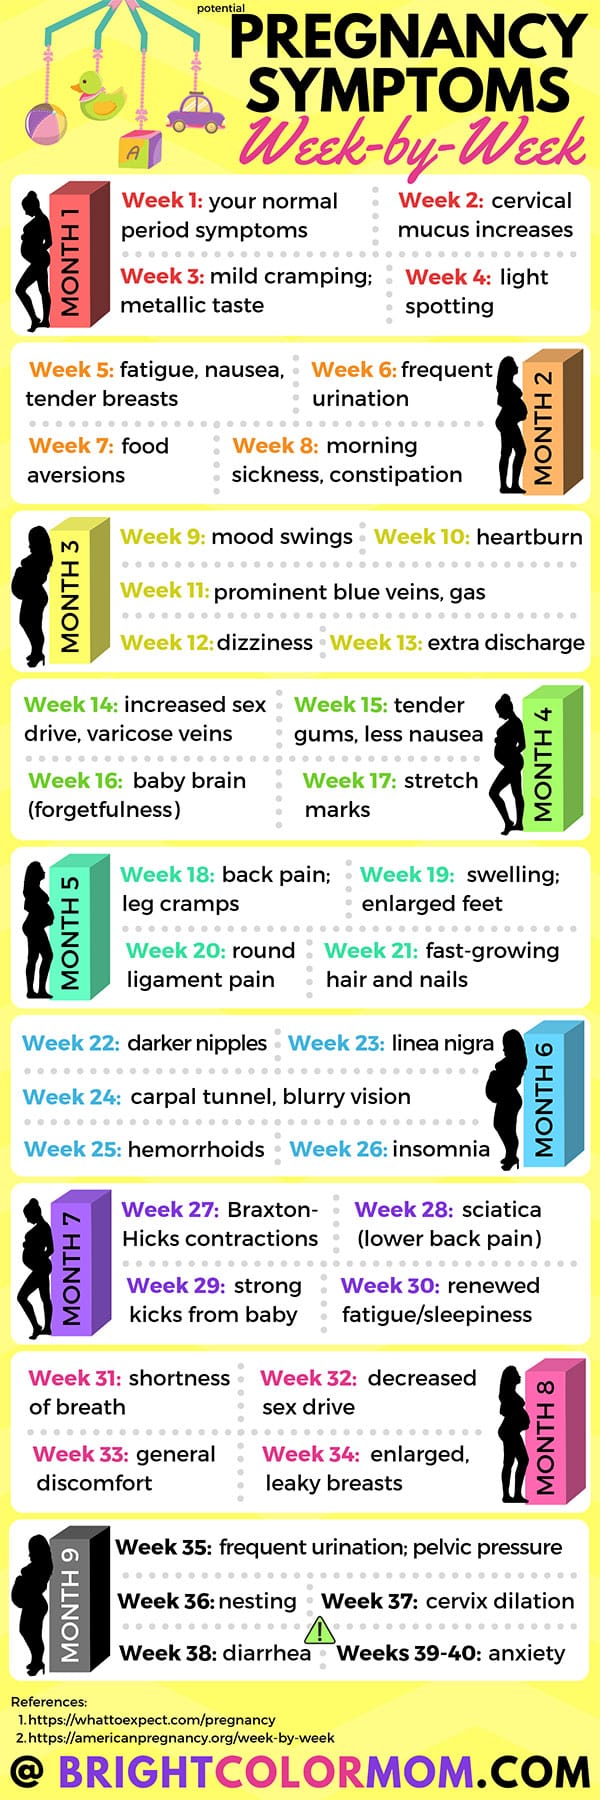 infographic of pregnancy symptoms listed week by week